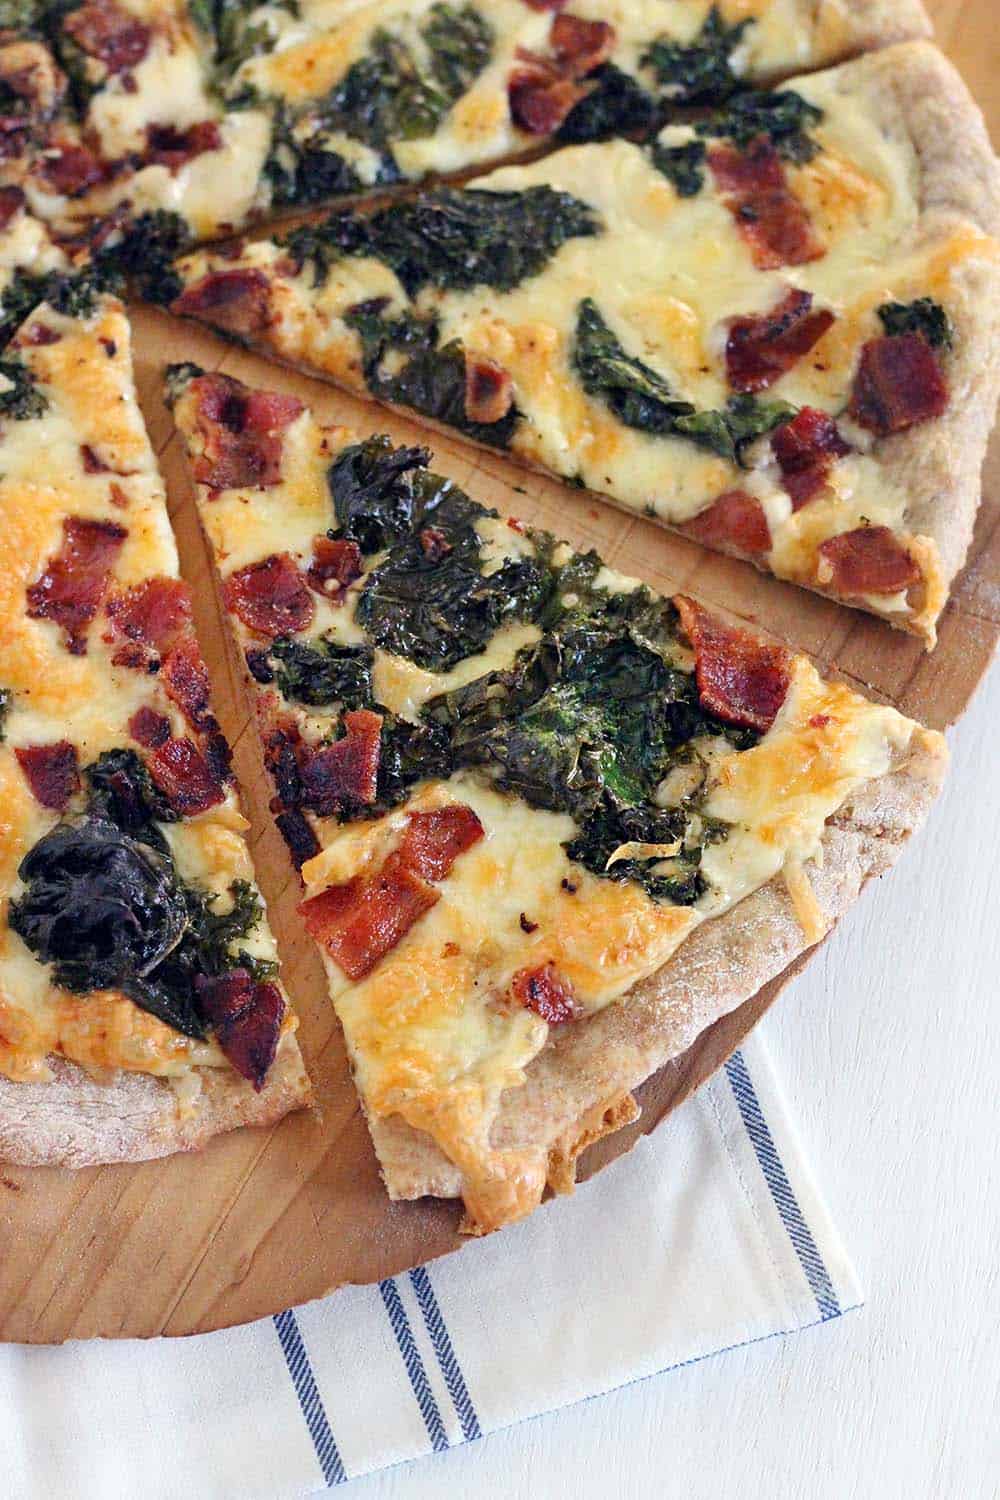 This Bacon and Kale Pizza is topped with super crispy kale and bacon pieces. This recipe comes together with only 5 ingredients in under 30 minutes!